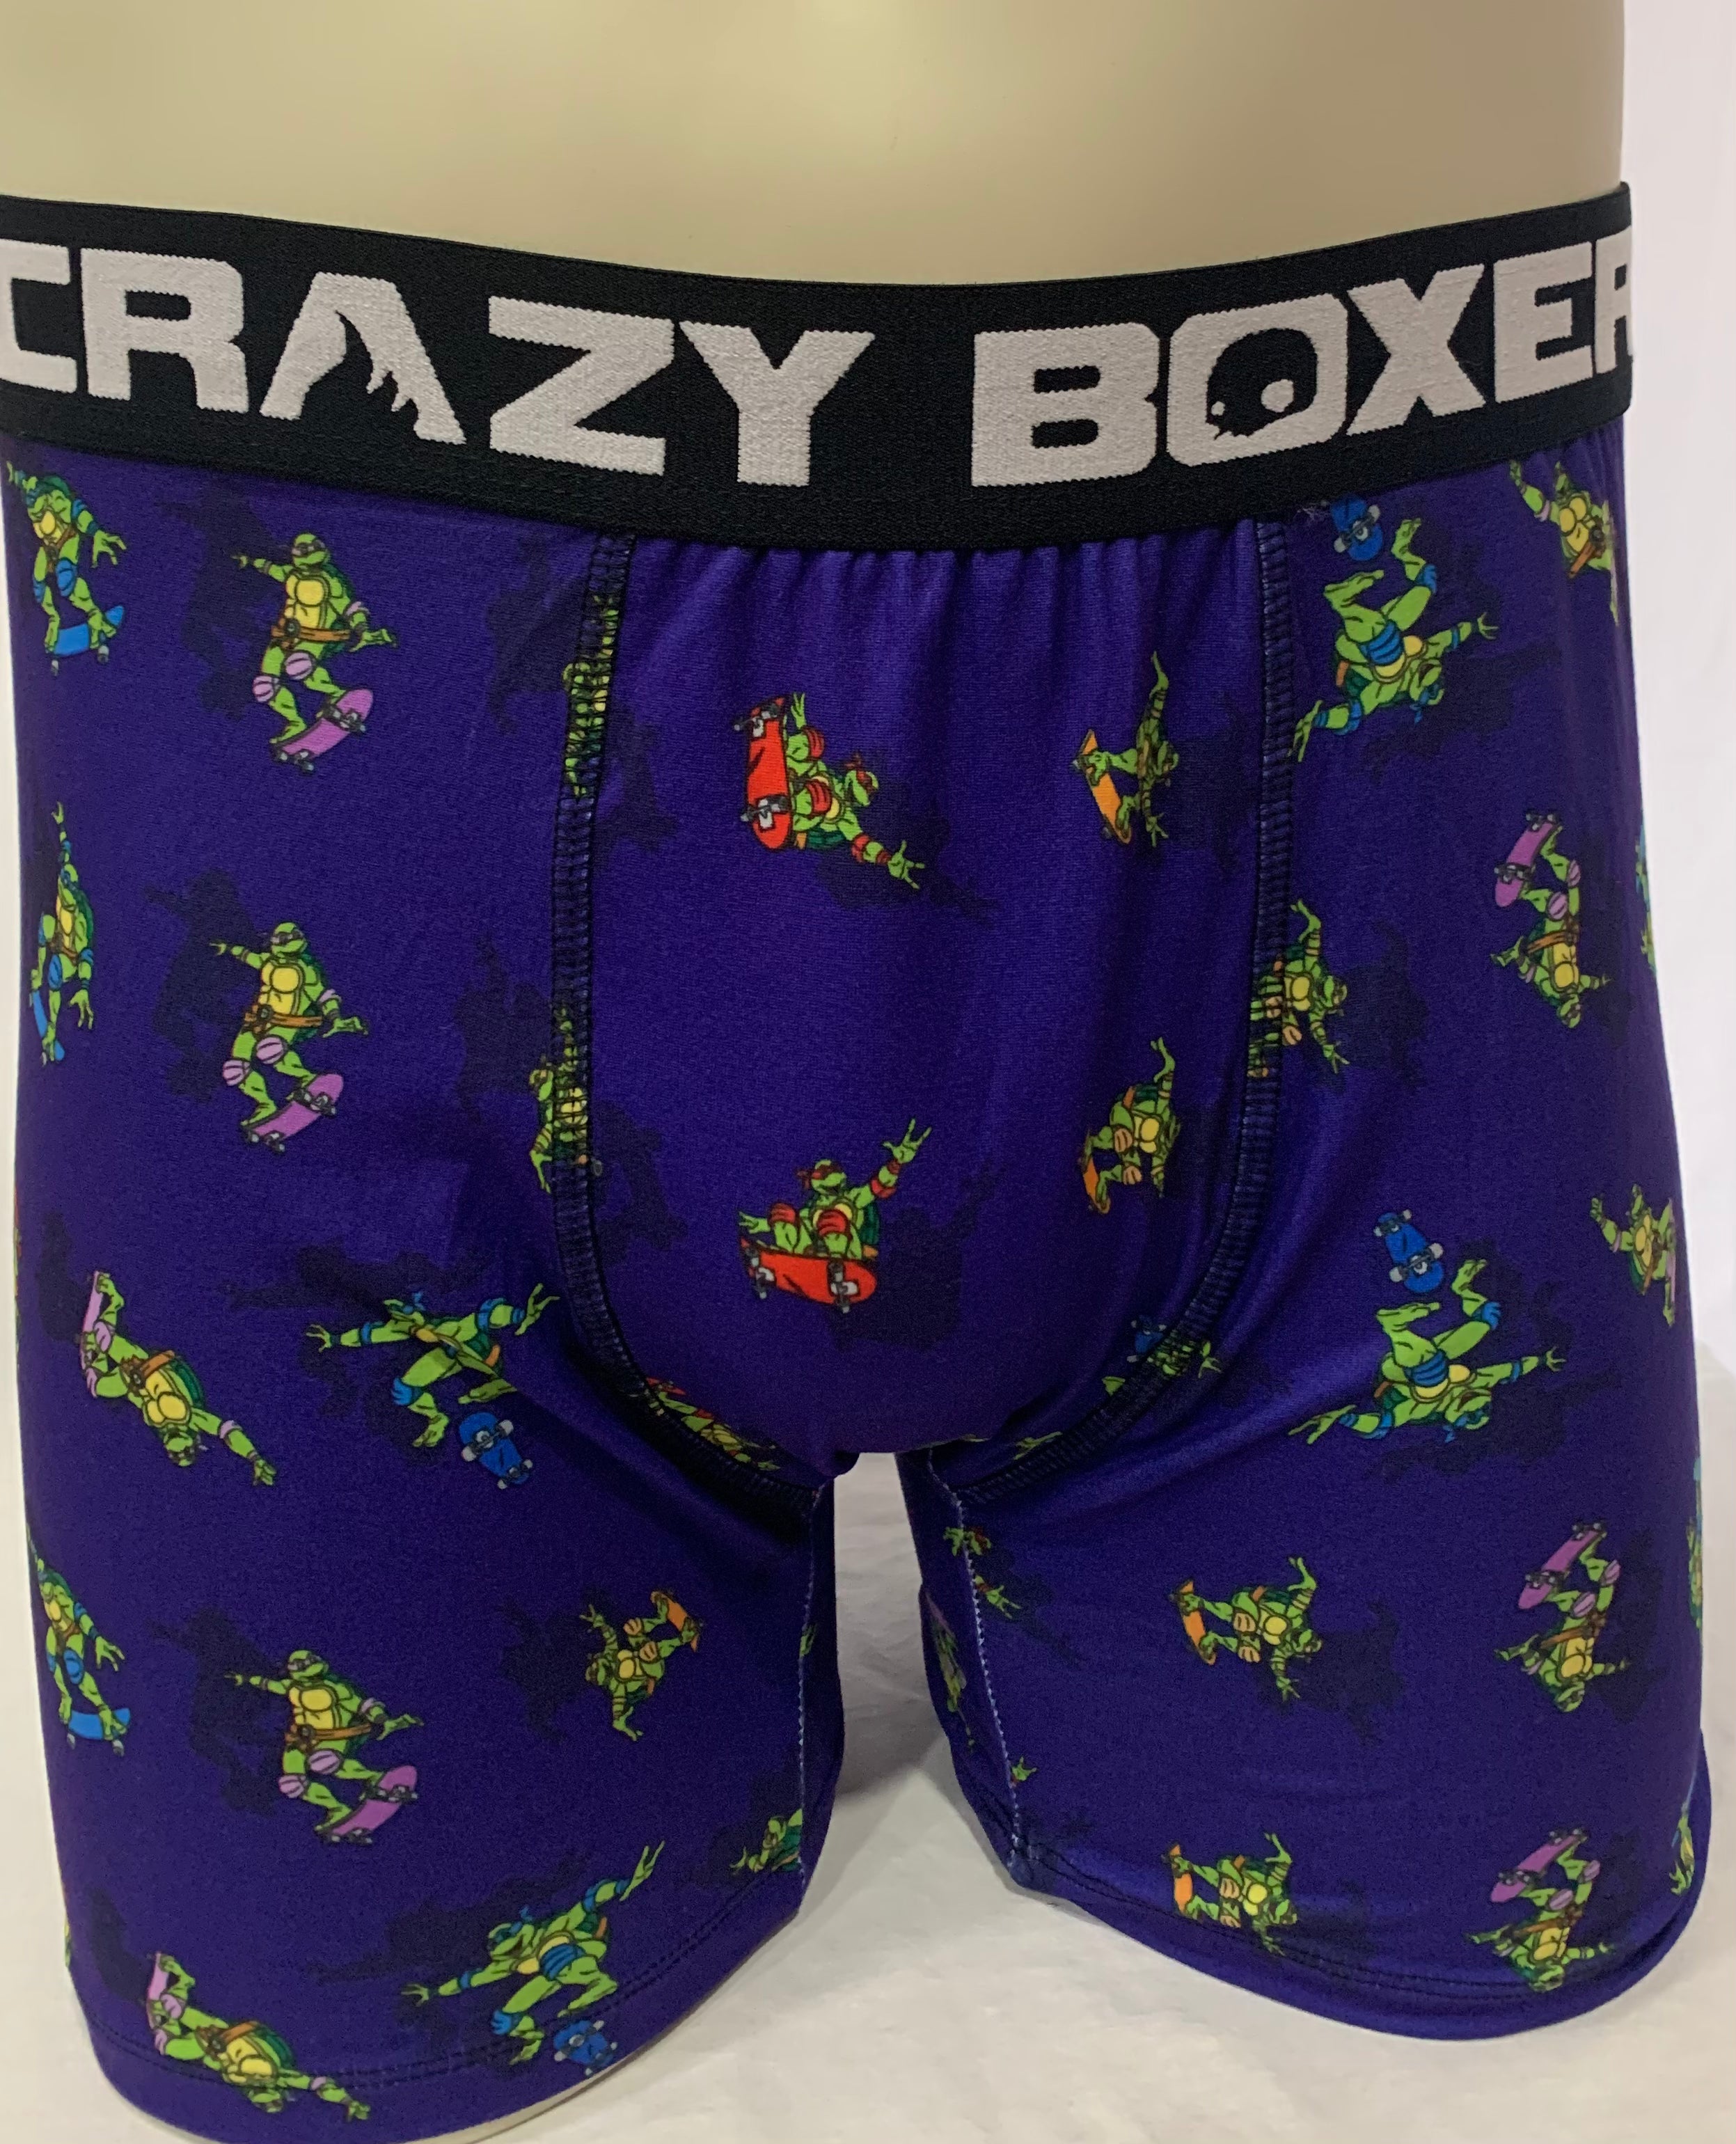 Extra Large Crazy Boxers Men Boxers - AFL 25.00 – You and Me